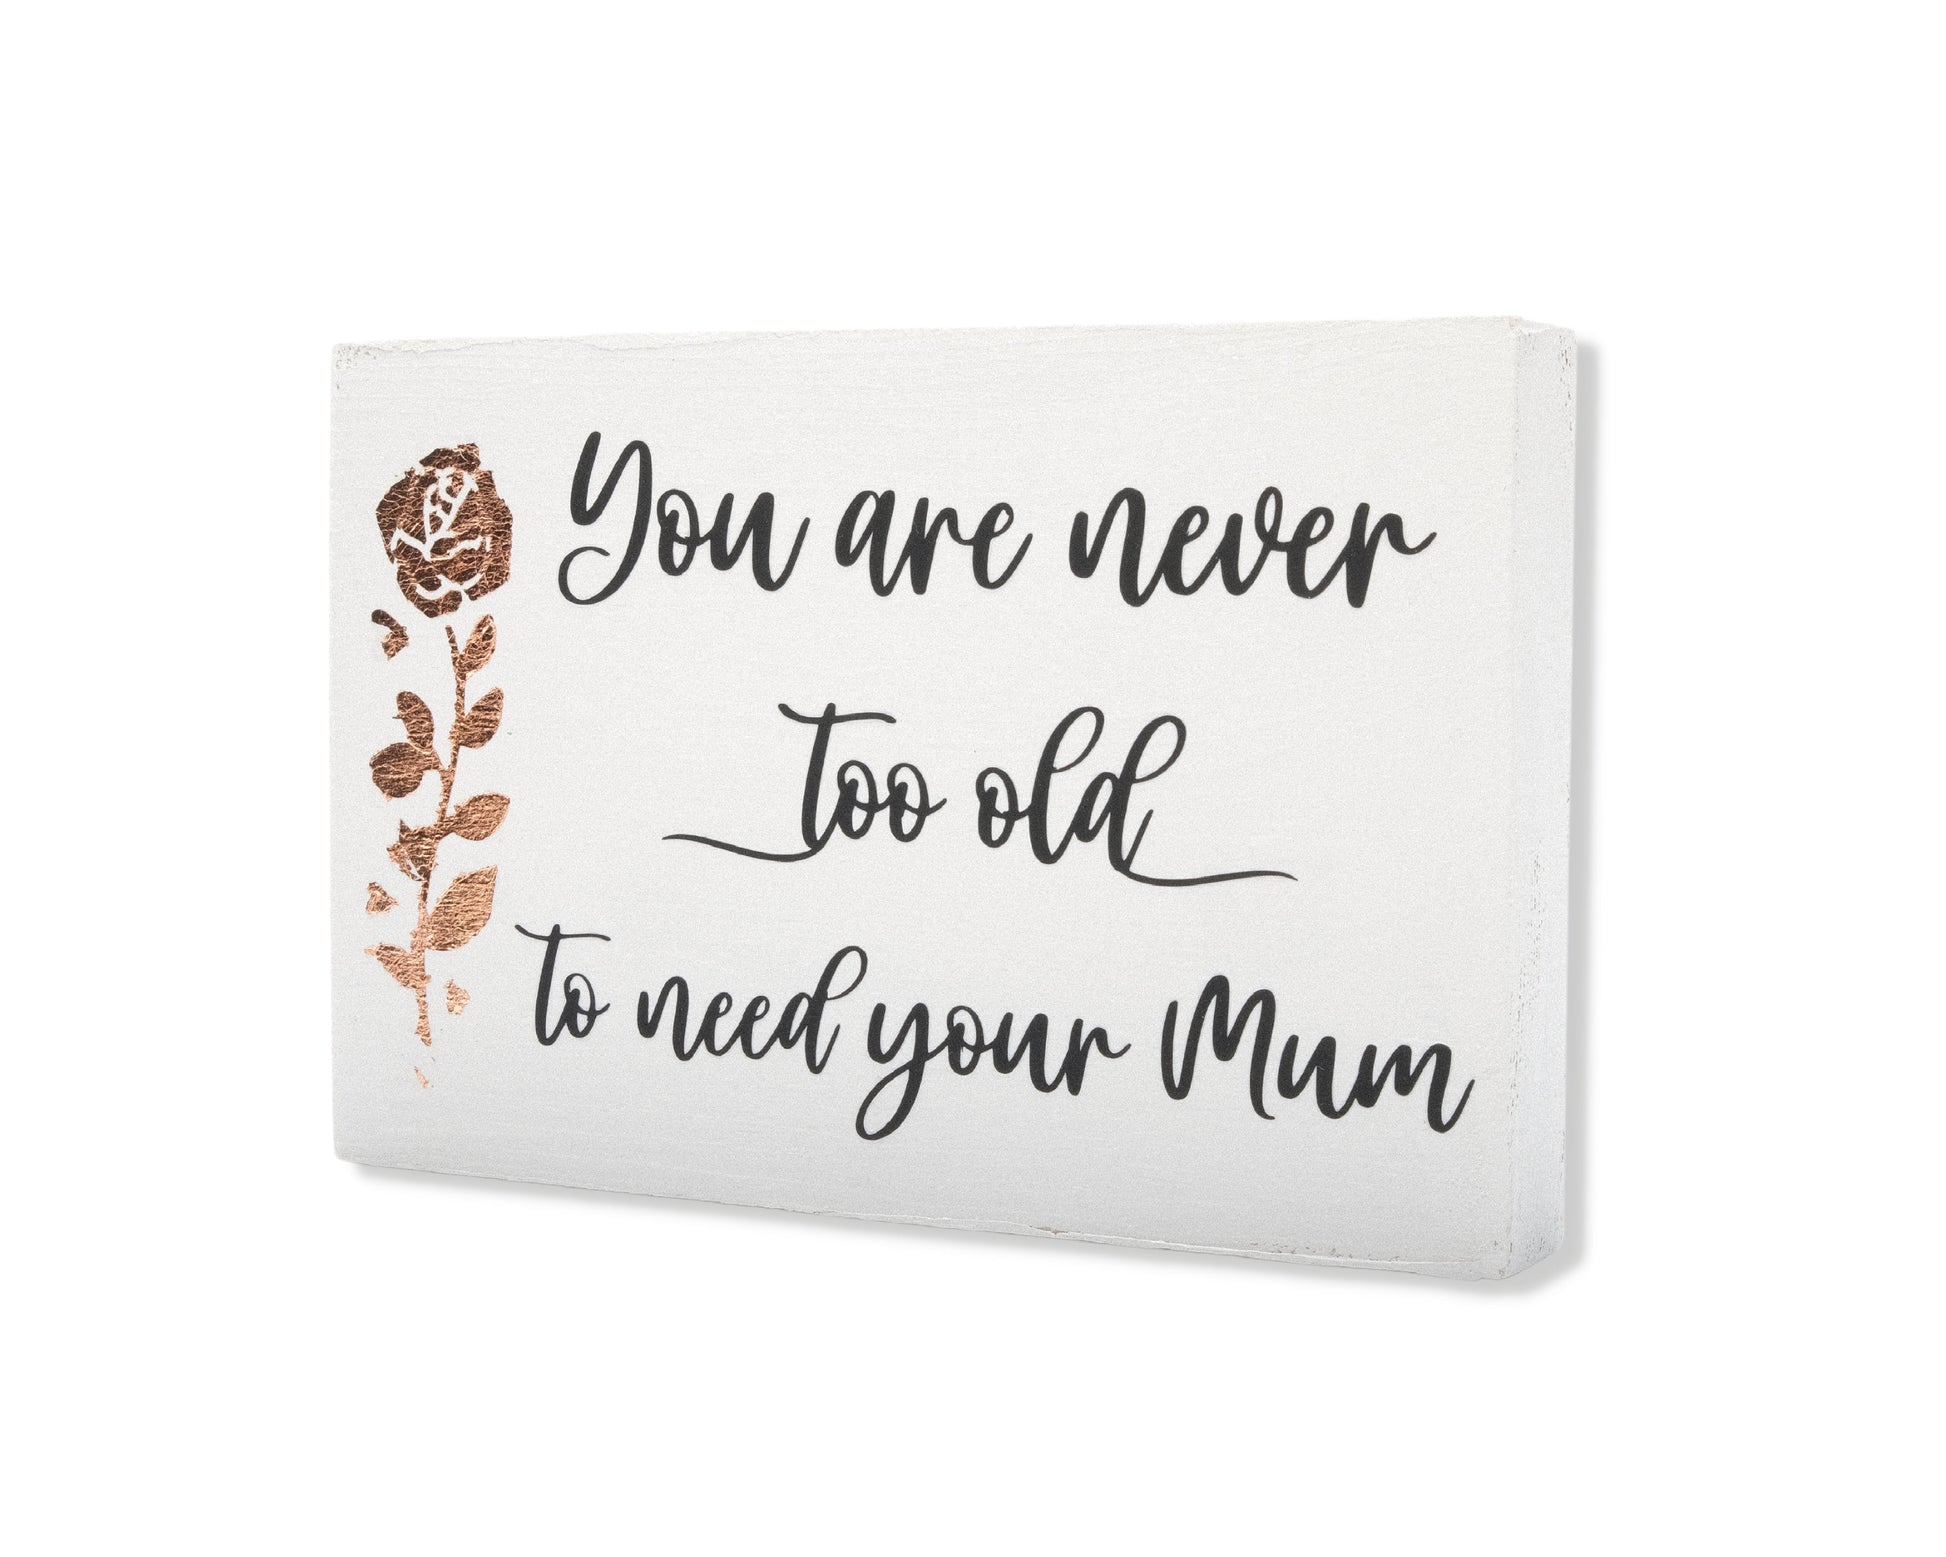 Small freestanding rectangular wooden sign displayed at 35 degree angle to show depth of sign. White wood stain, bronze rose gold tall rose flower on left side. Black message emotive font, You are never too old to need your Mum. Studio style photo.